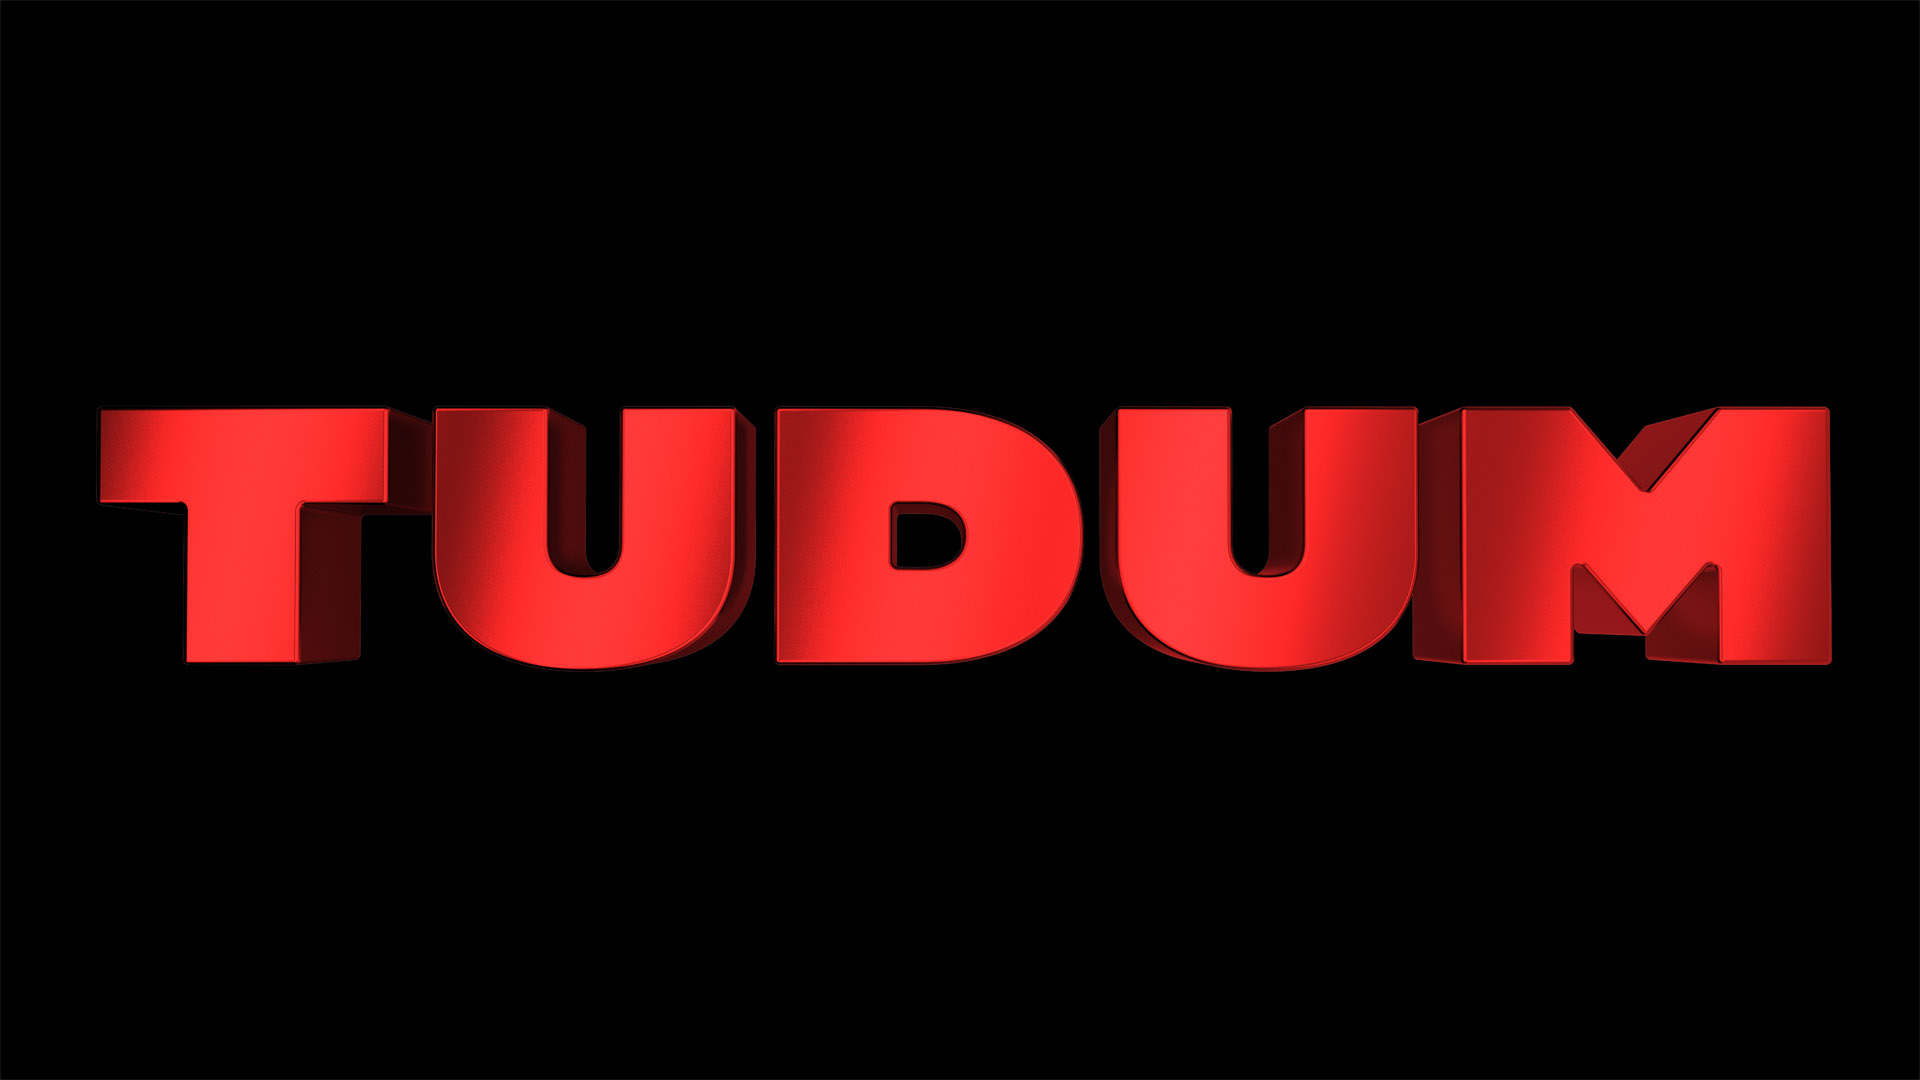 The official logo for Tudum, Netflix's globan fan event, with red writing on a black background